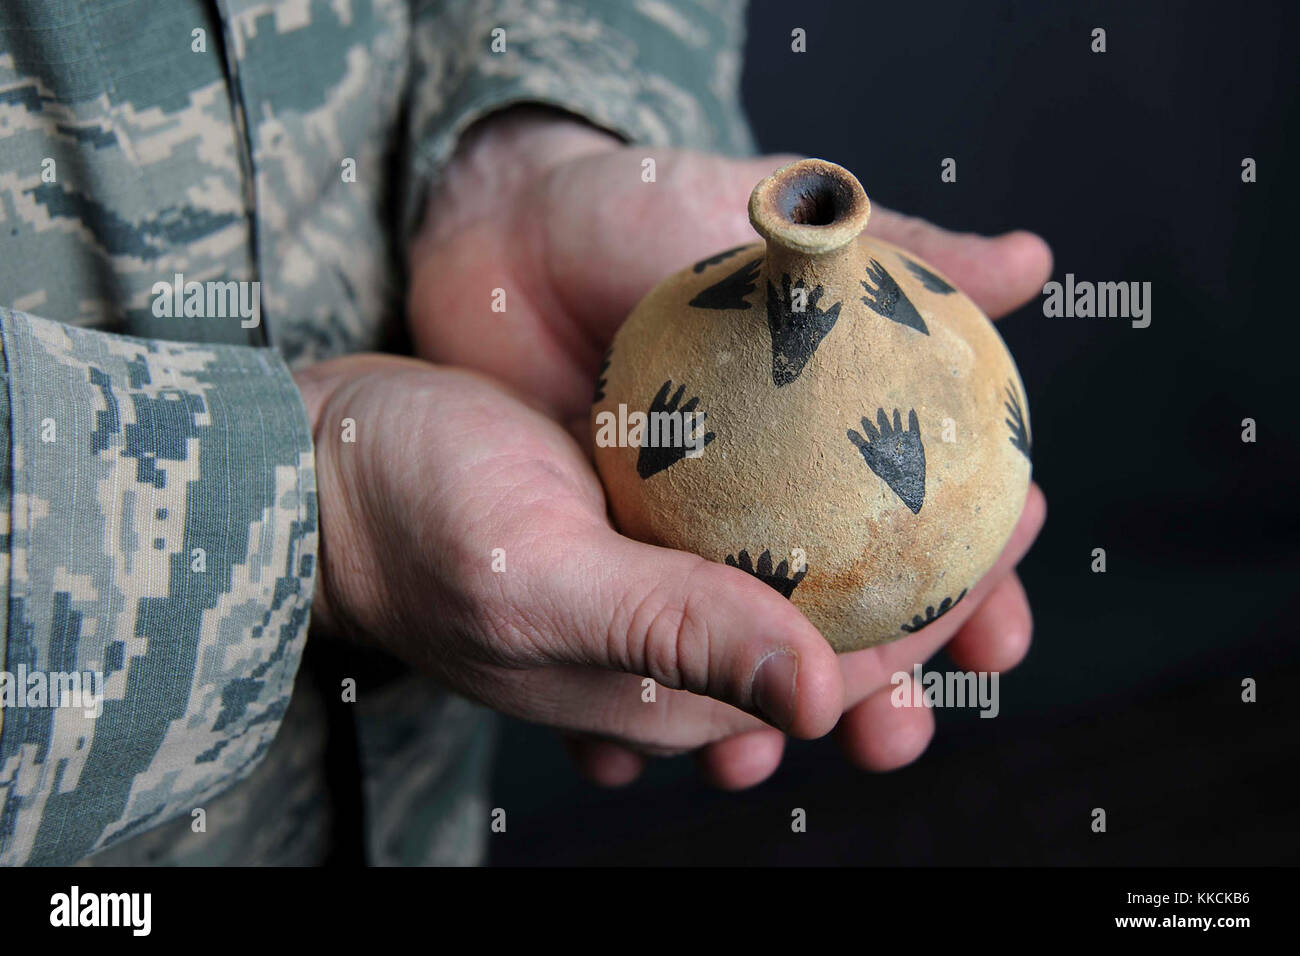 Capt. Travis Trueblood, 11th Wing assistant staff judge advocate, holds a piece of pottery at Joint Base Andrews, Md., Nov. 16, 2017. The pottery was gifted to Trueblood by a member of the Choctaw and Seminole Nations during a speech he gave about federal American Indian law at a the University of Florida for the 2016 National American Indian Heritage Month. (U.S. Air Force photo by Airman Michael Murphy) Stock Photo